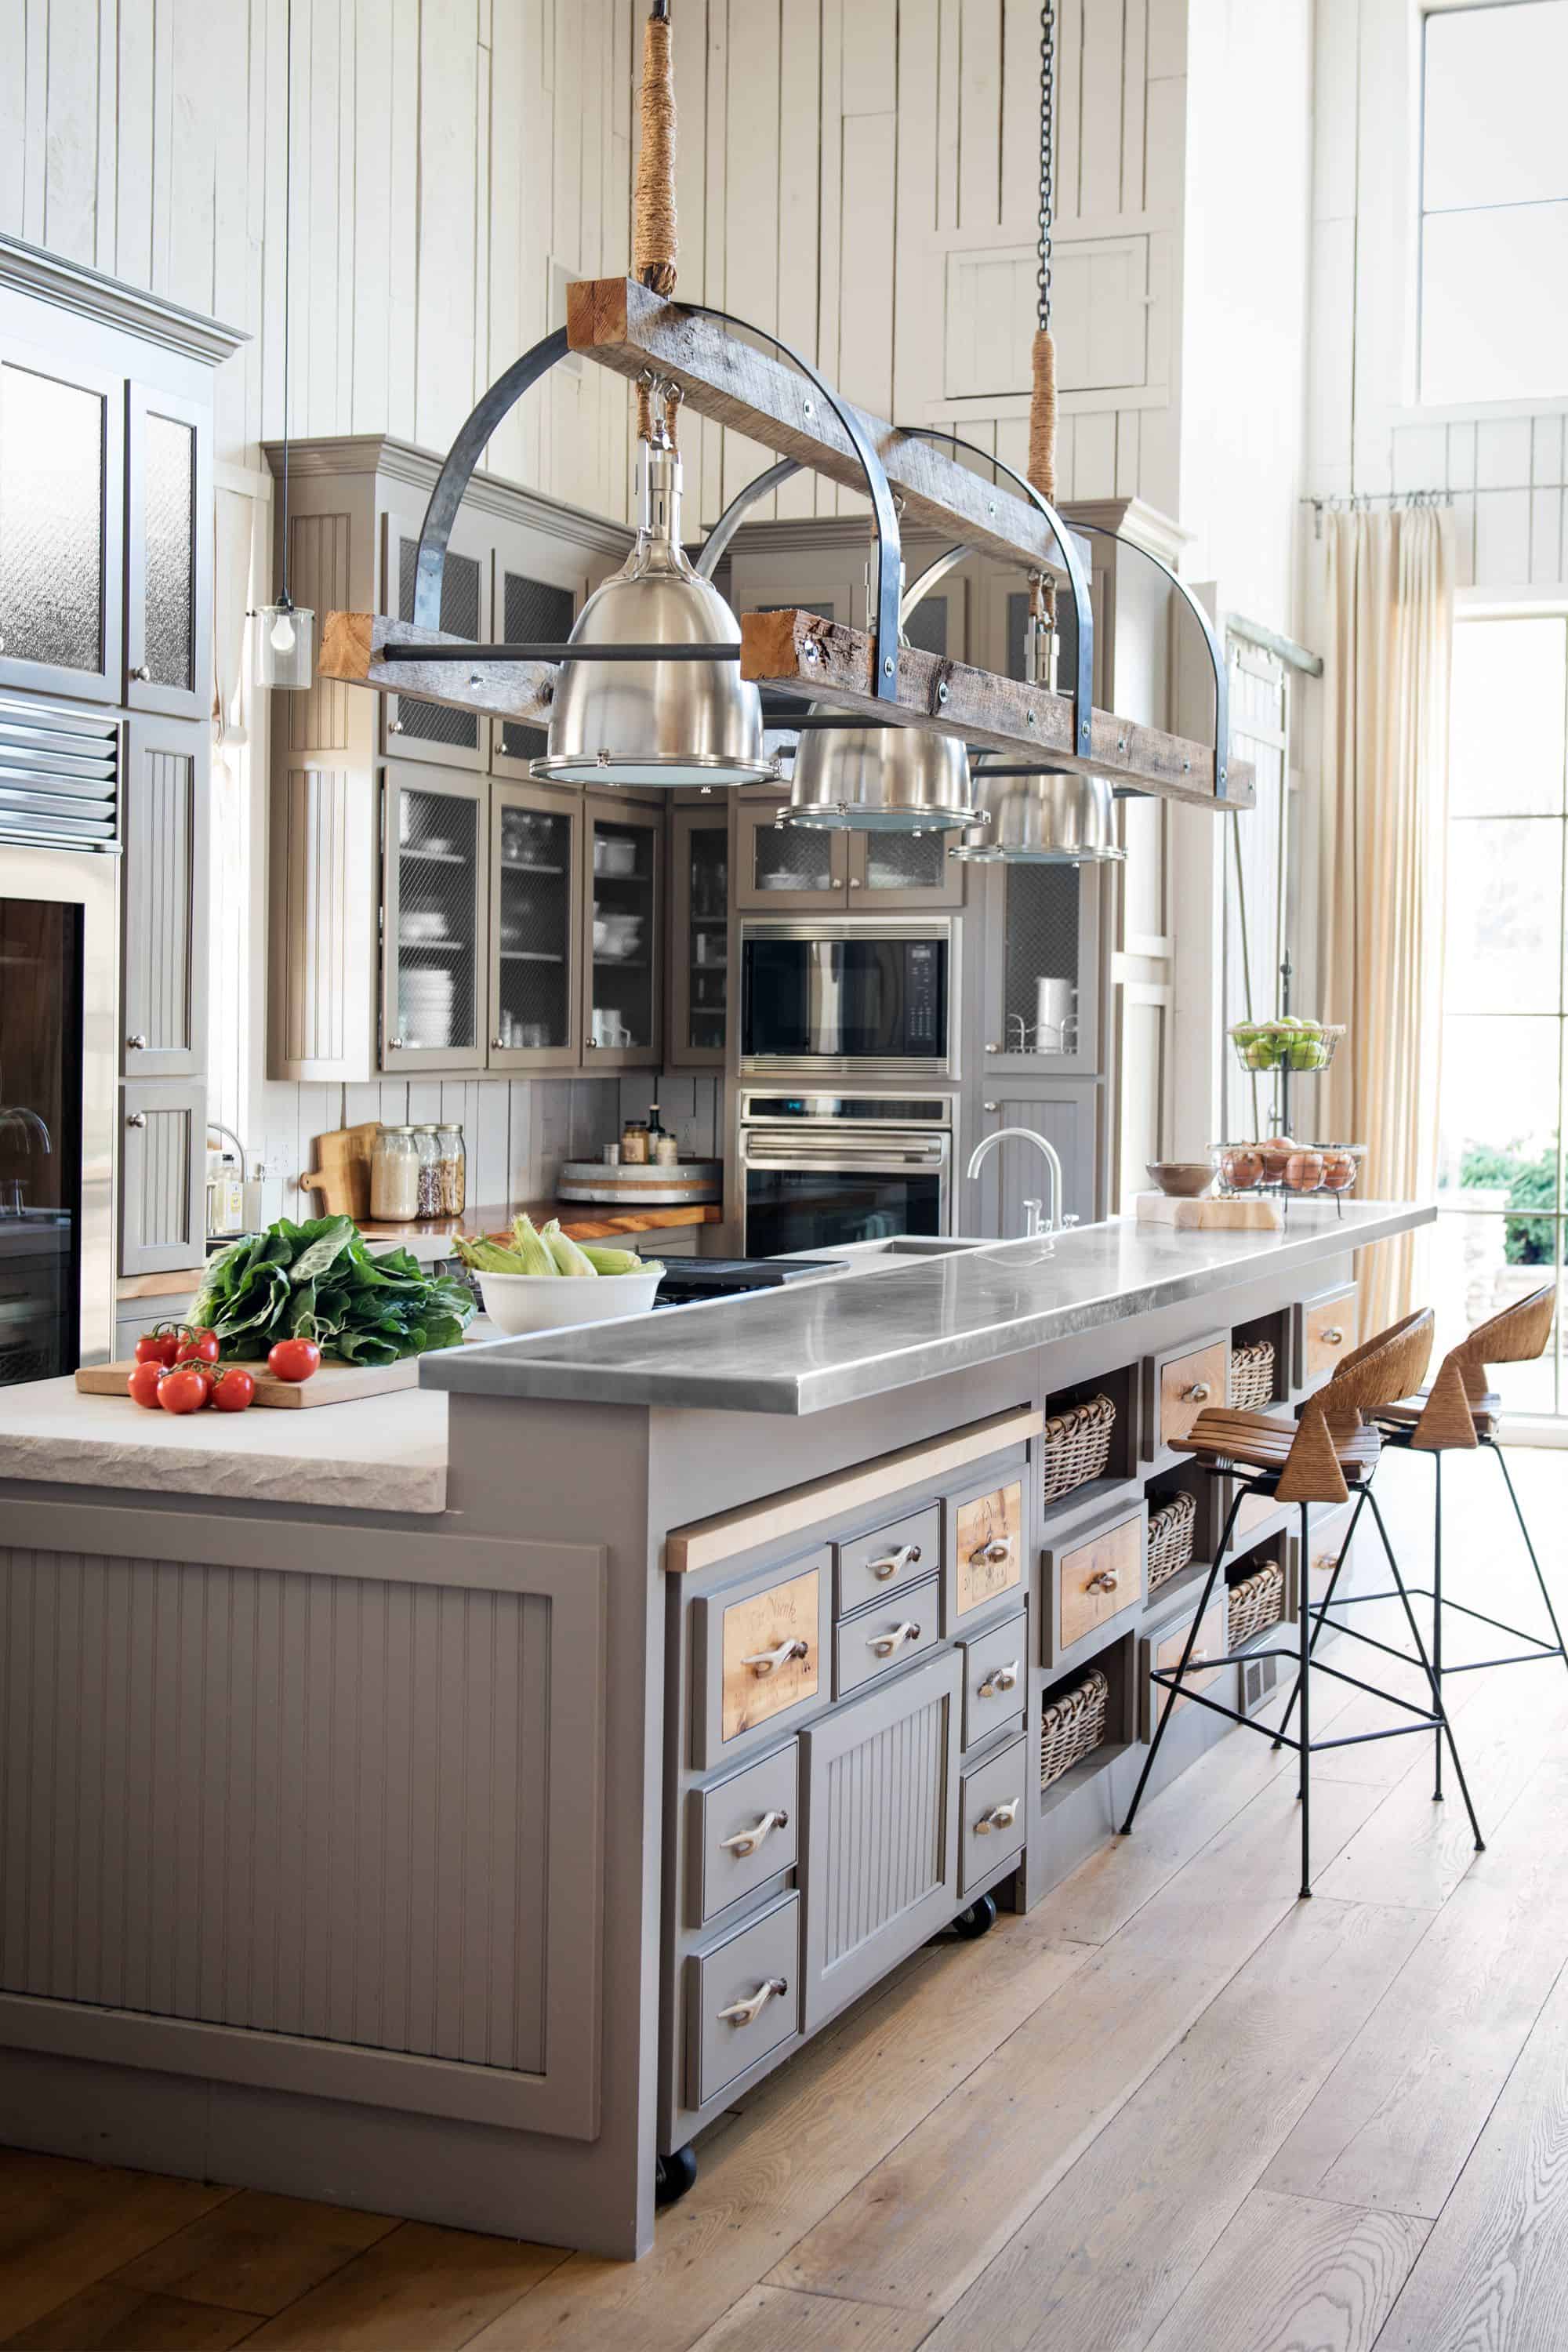 open and airy with shades of gray